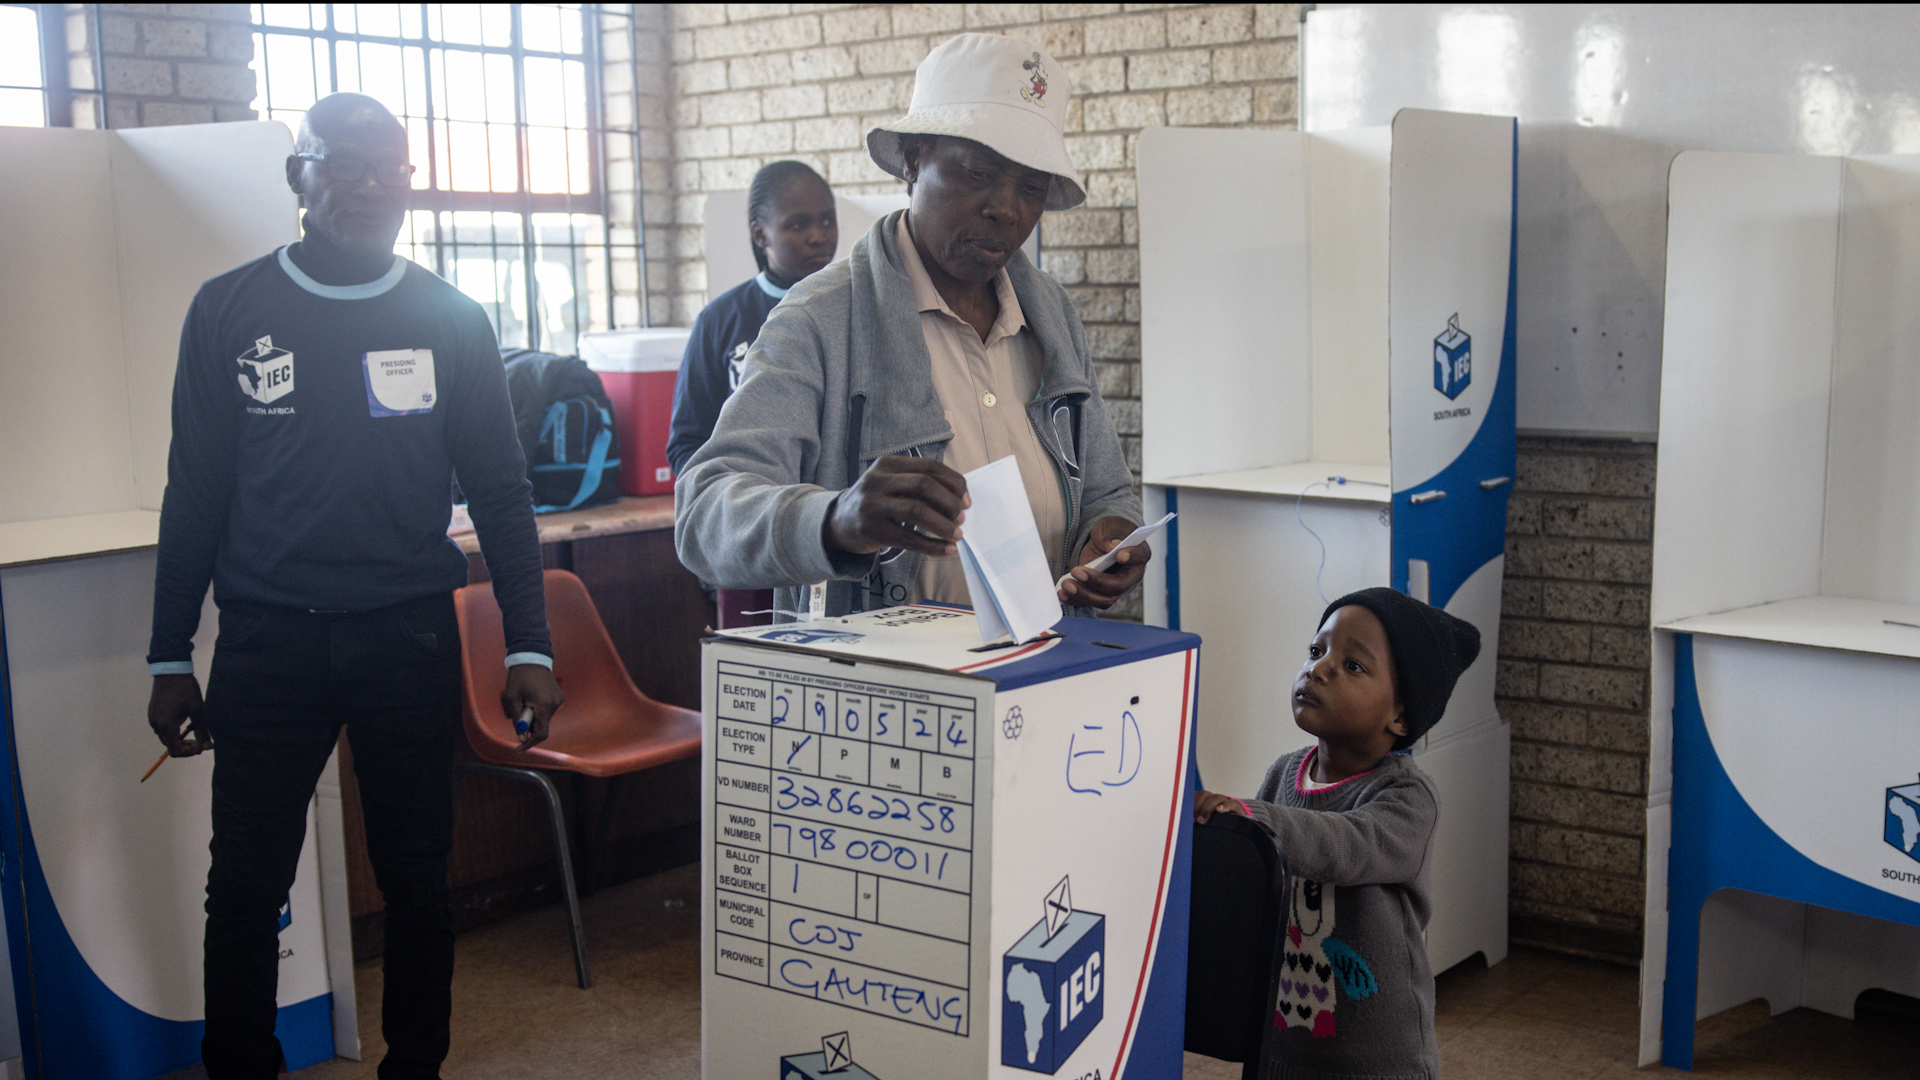 South Africans vote in the most competitive election since apartheid, with the ANC possibly losing its majority after 30 years.